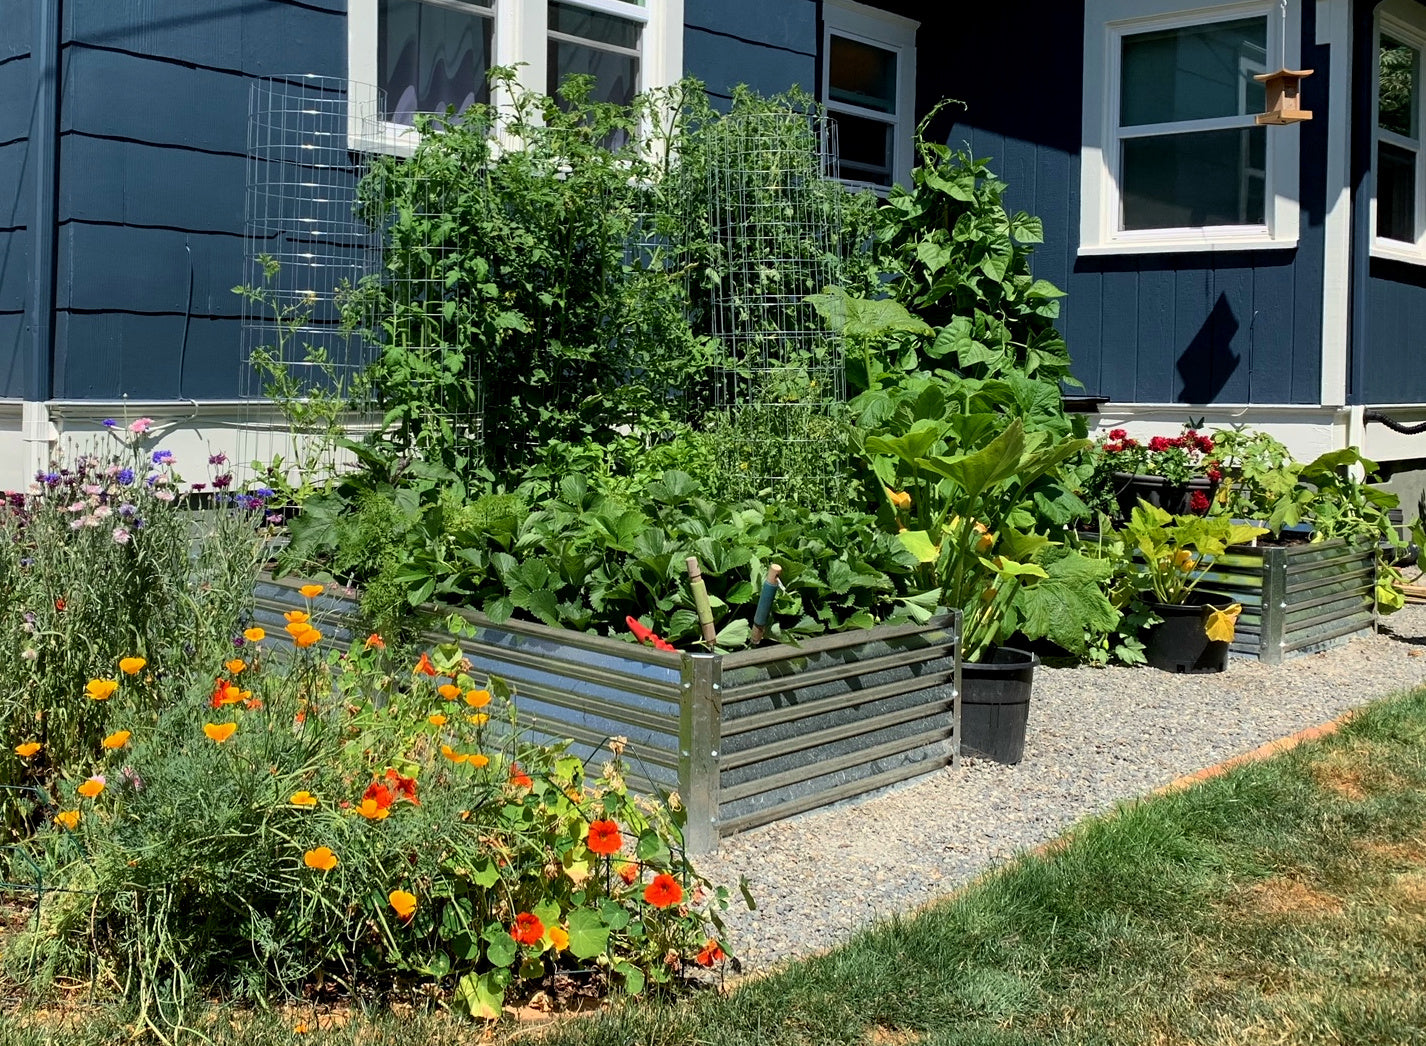 wide u garden bed with strawberries, beans, tomatoes